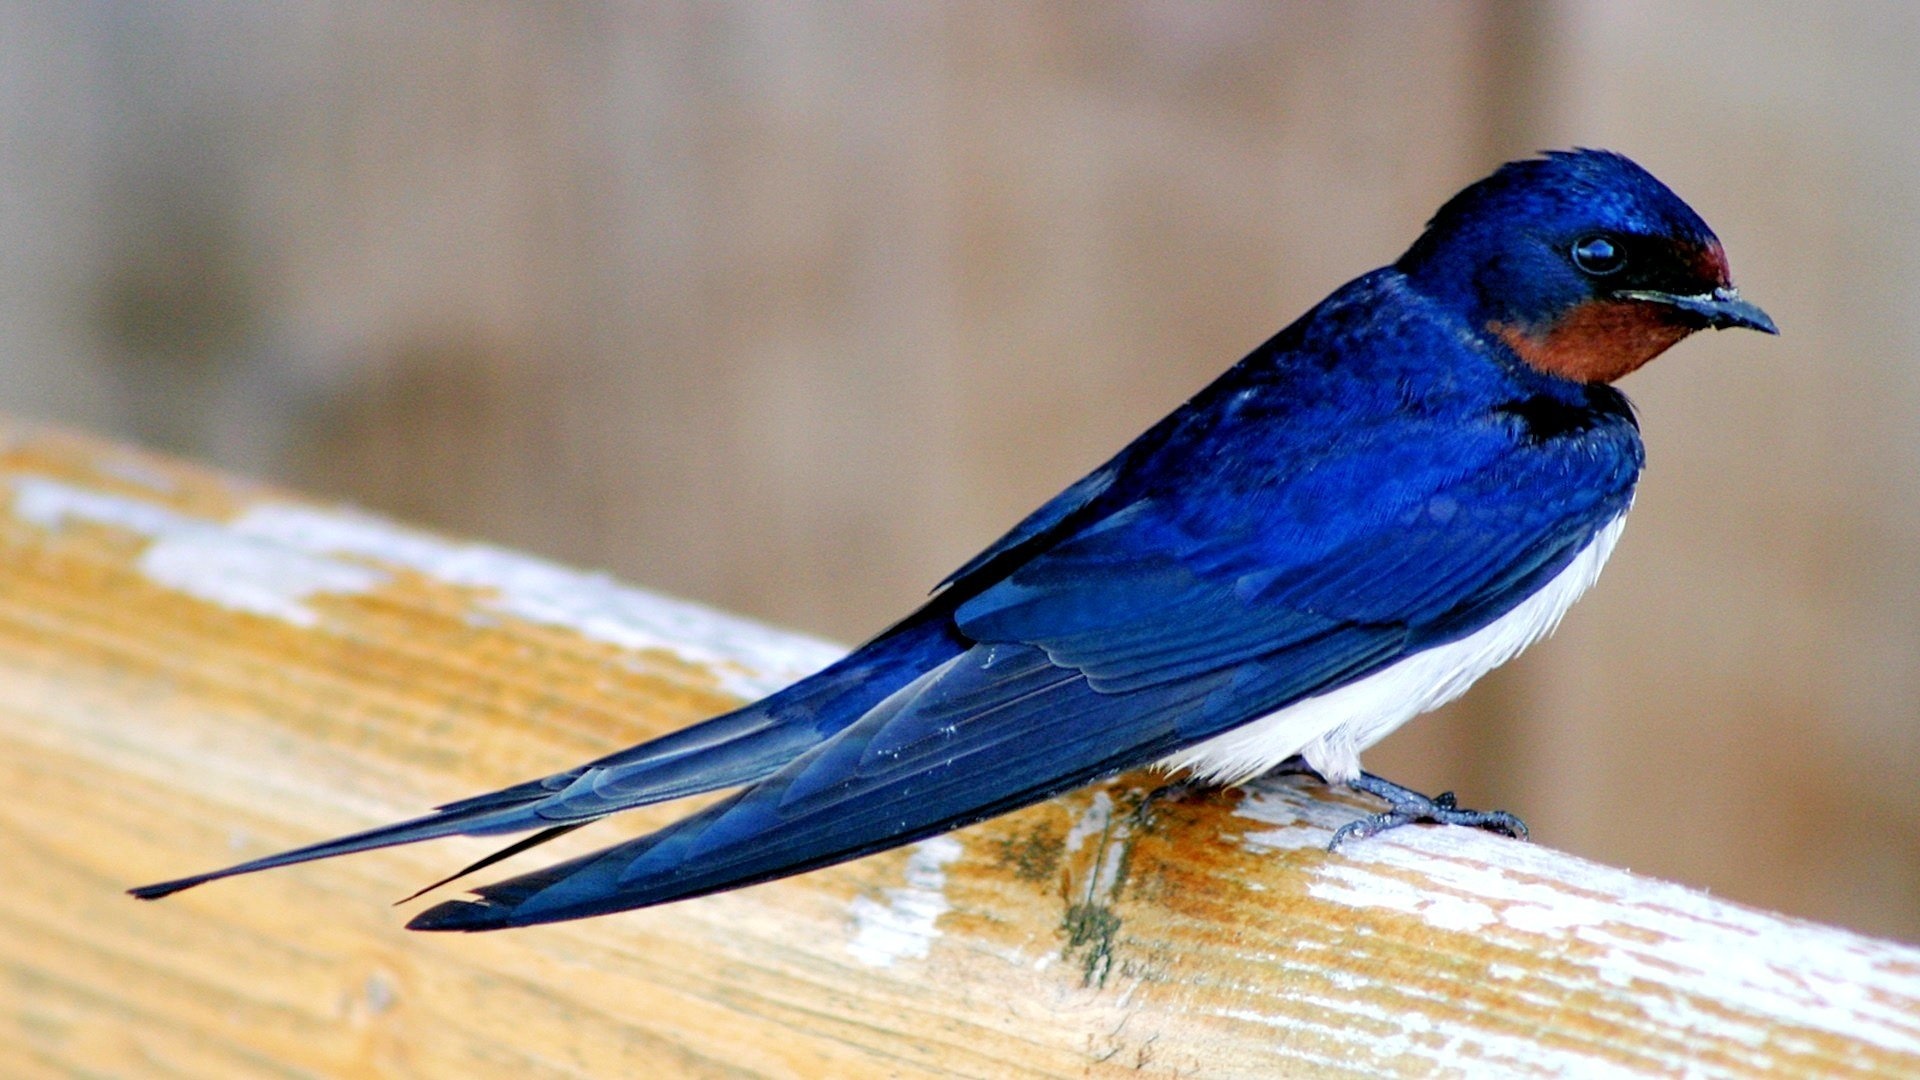 Swallow wallpapers, Illustrated swallows, Avian beauty, Nature-themed, 1920x1080 Full HD Desktop